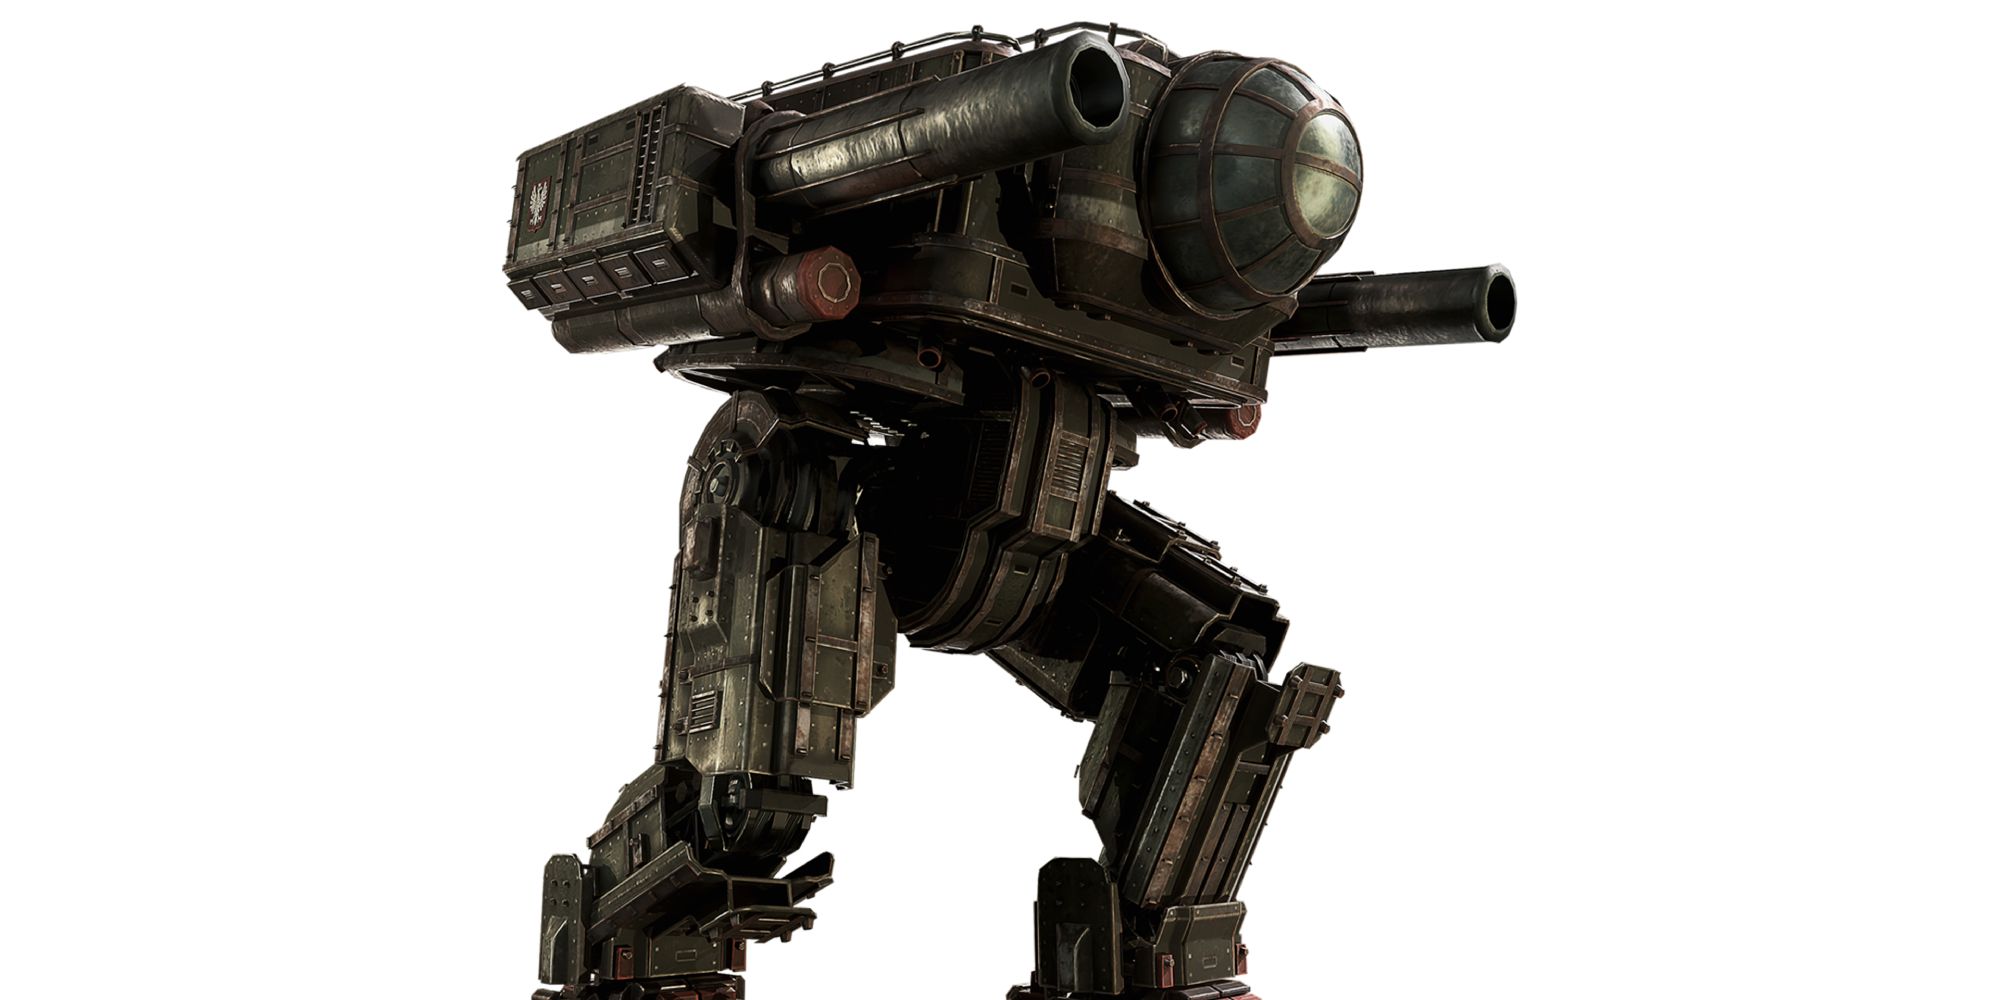 Iron Harvest Mechs a side shot of the towering mech PZM-24 Tur with its tree-trunk thick legs marching forward and its two large cannons pointing to the side against a white background